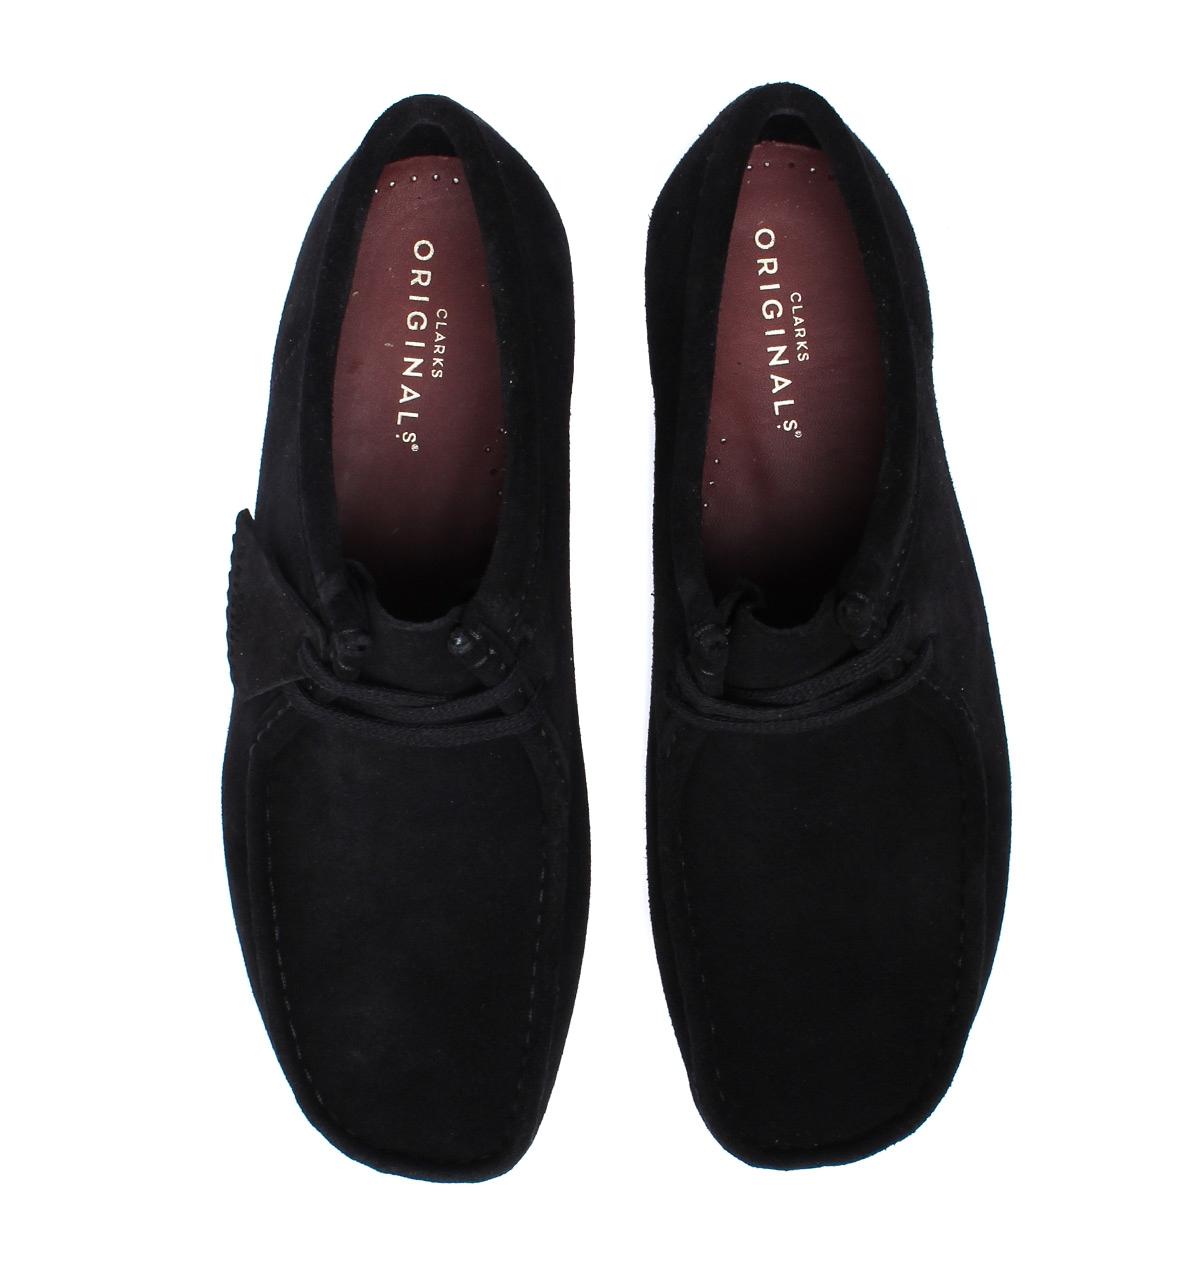 Clarks Black Suede Wallabee Low-cut Moccasin Boots - Lyst